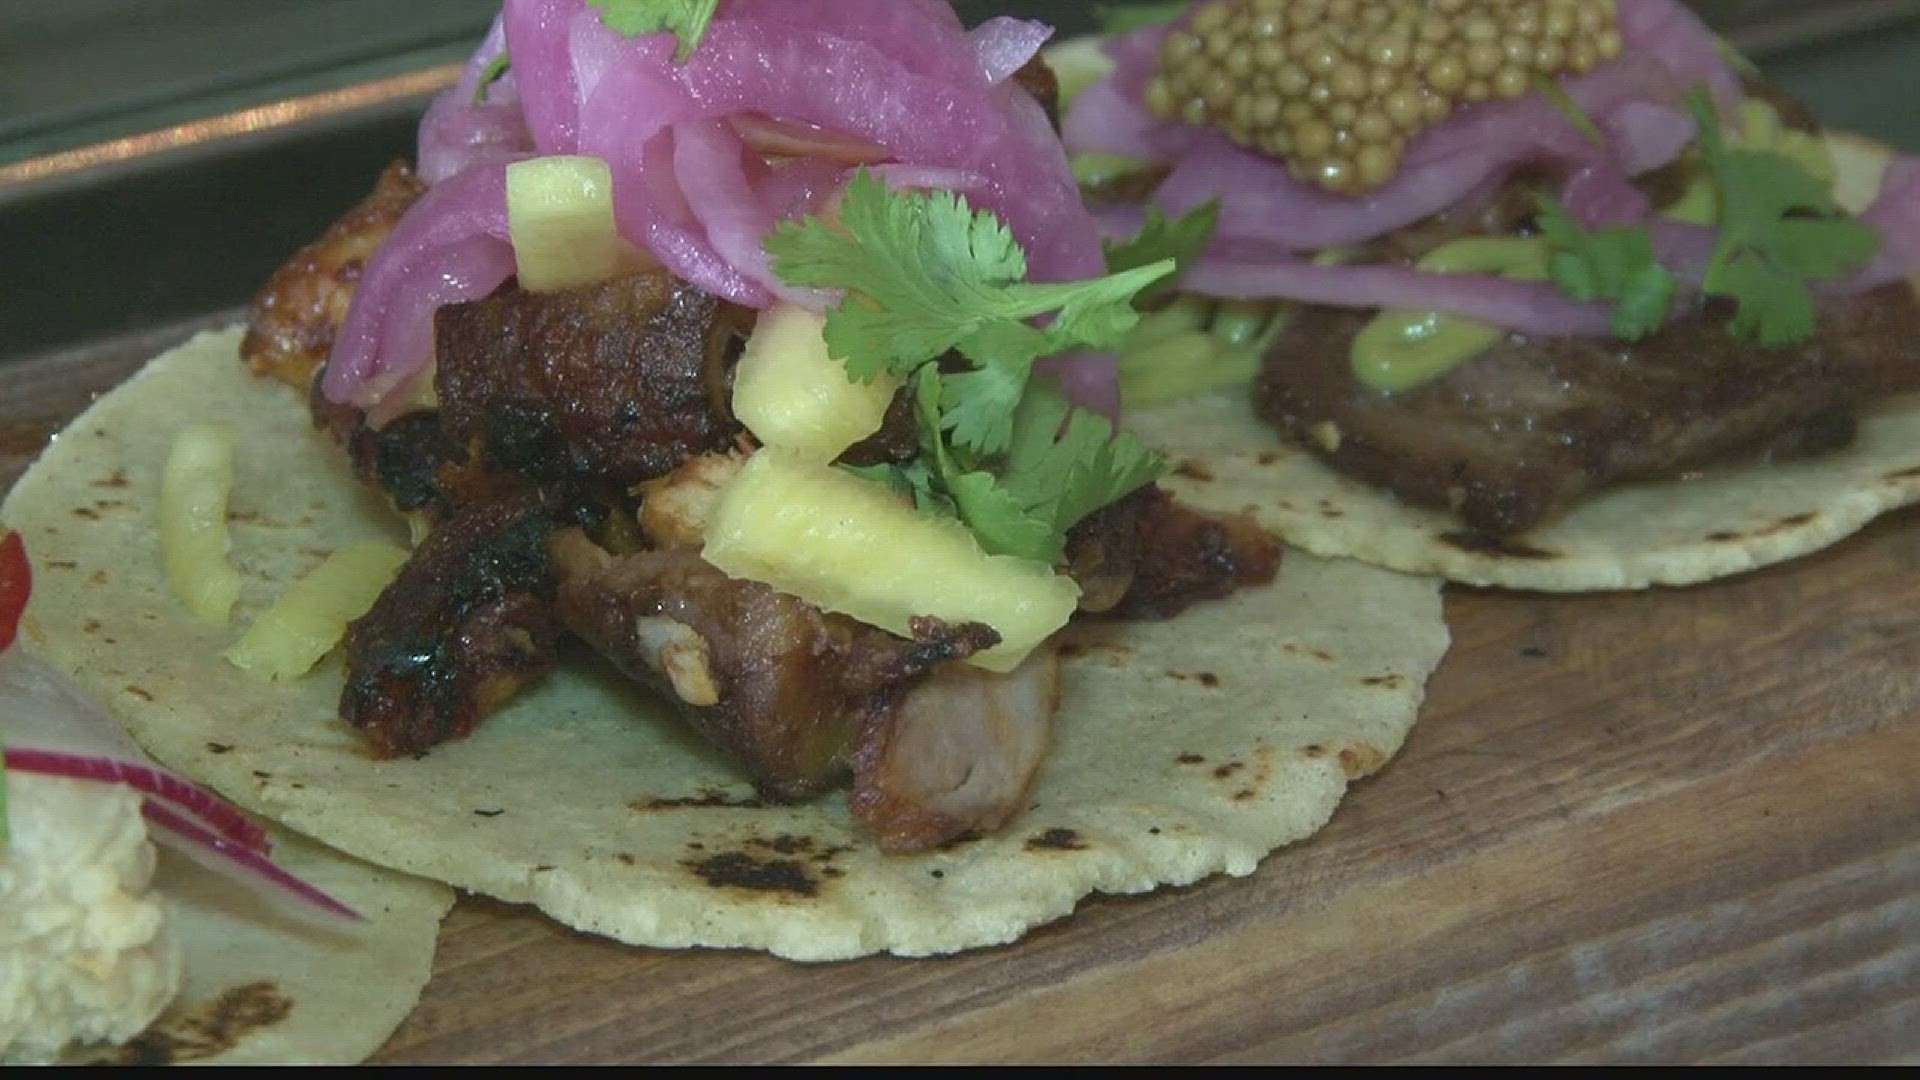 In this week's Unique Eats, Stephanie Barnes takes us inside a new downtown Mexican restaurant called Casa Azul.